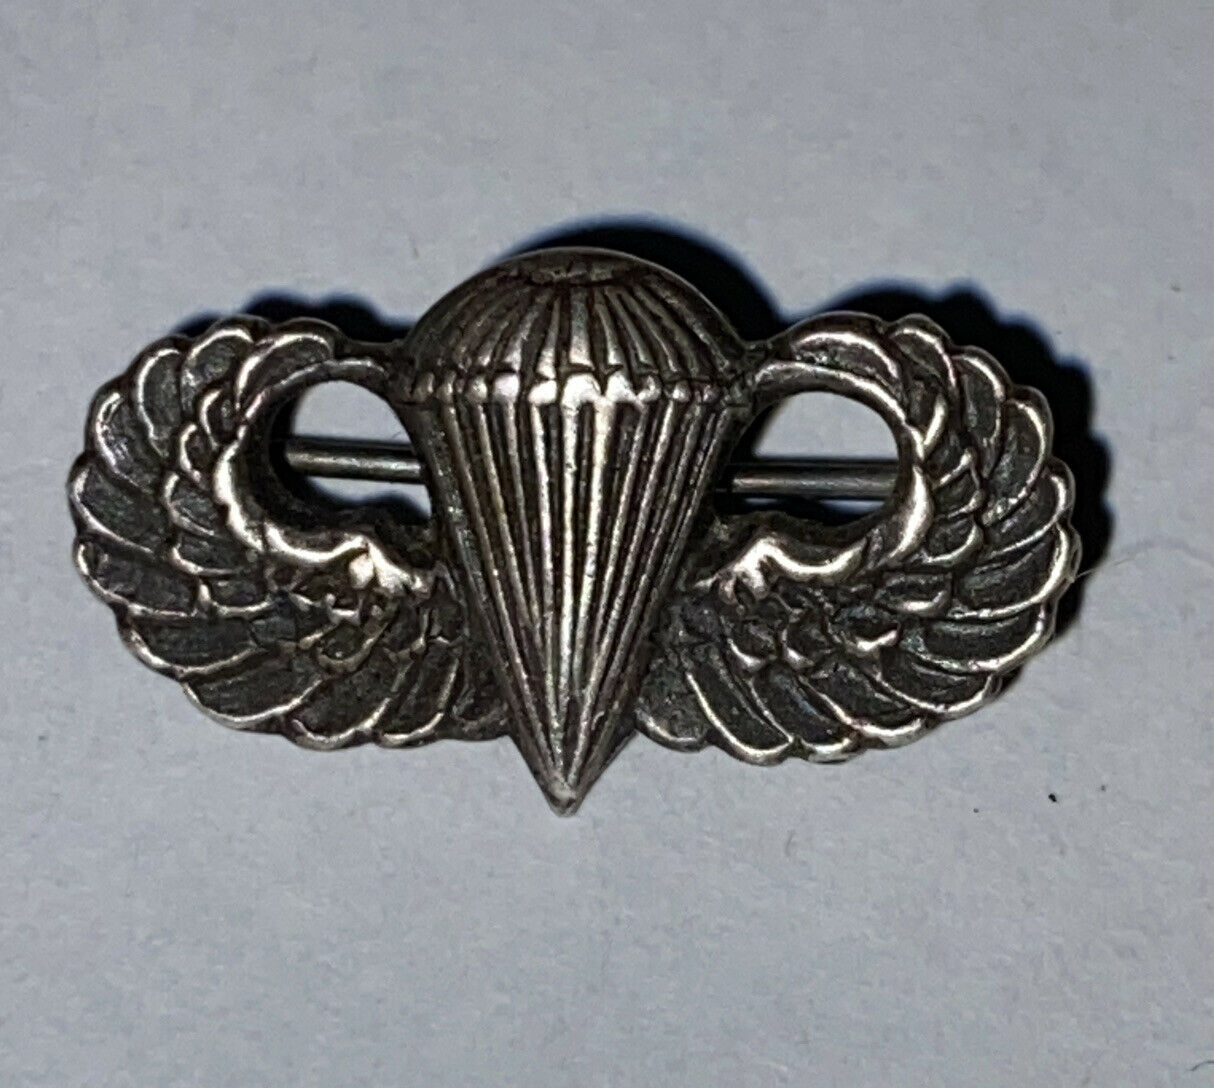 WWII U.S. PARATROOPER JUMP WING - PIN BACK, STERLING